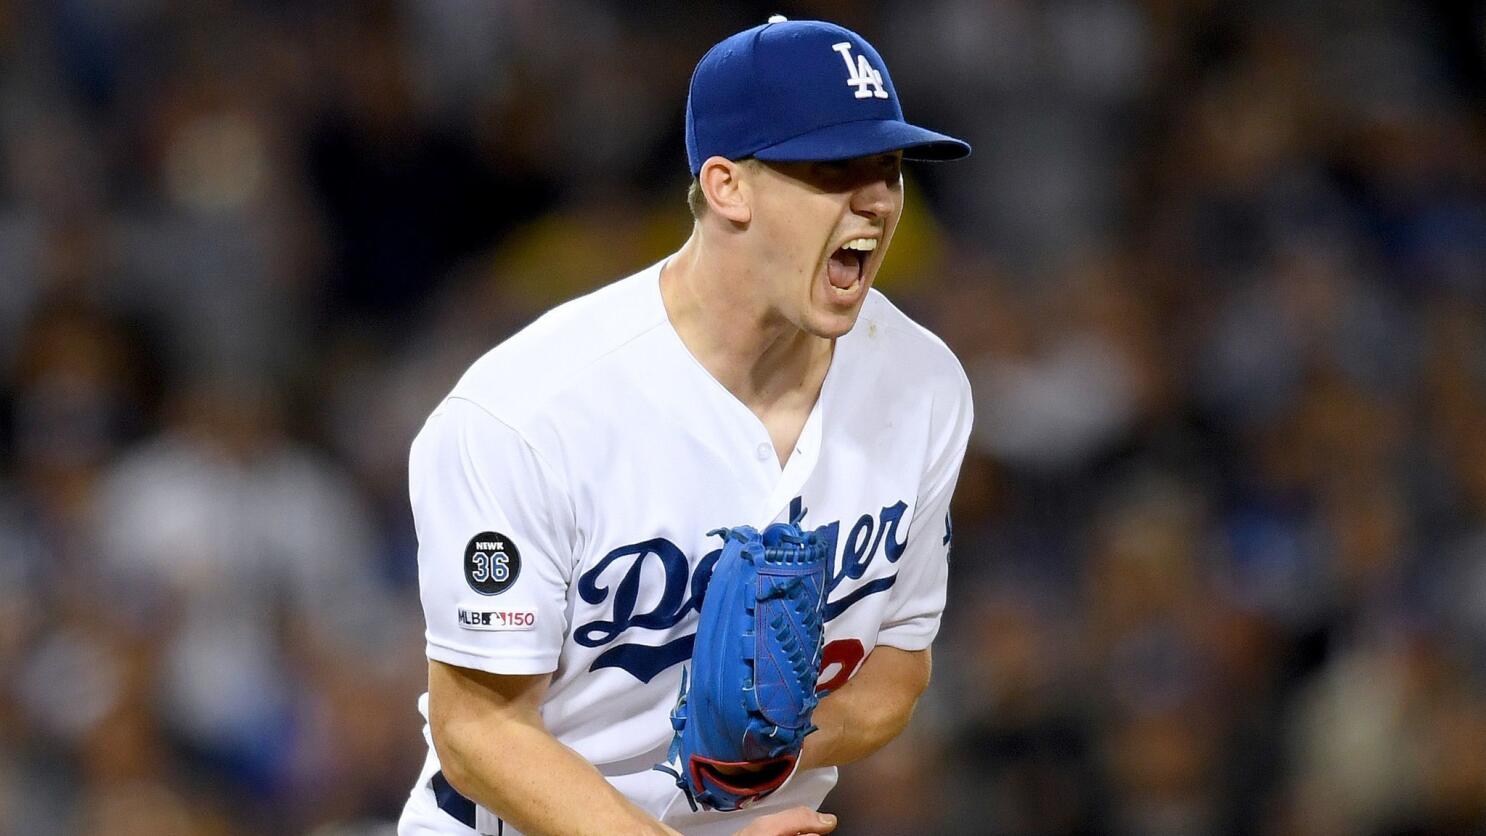 Walker Buehler strikes out 15 in complete game